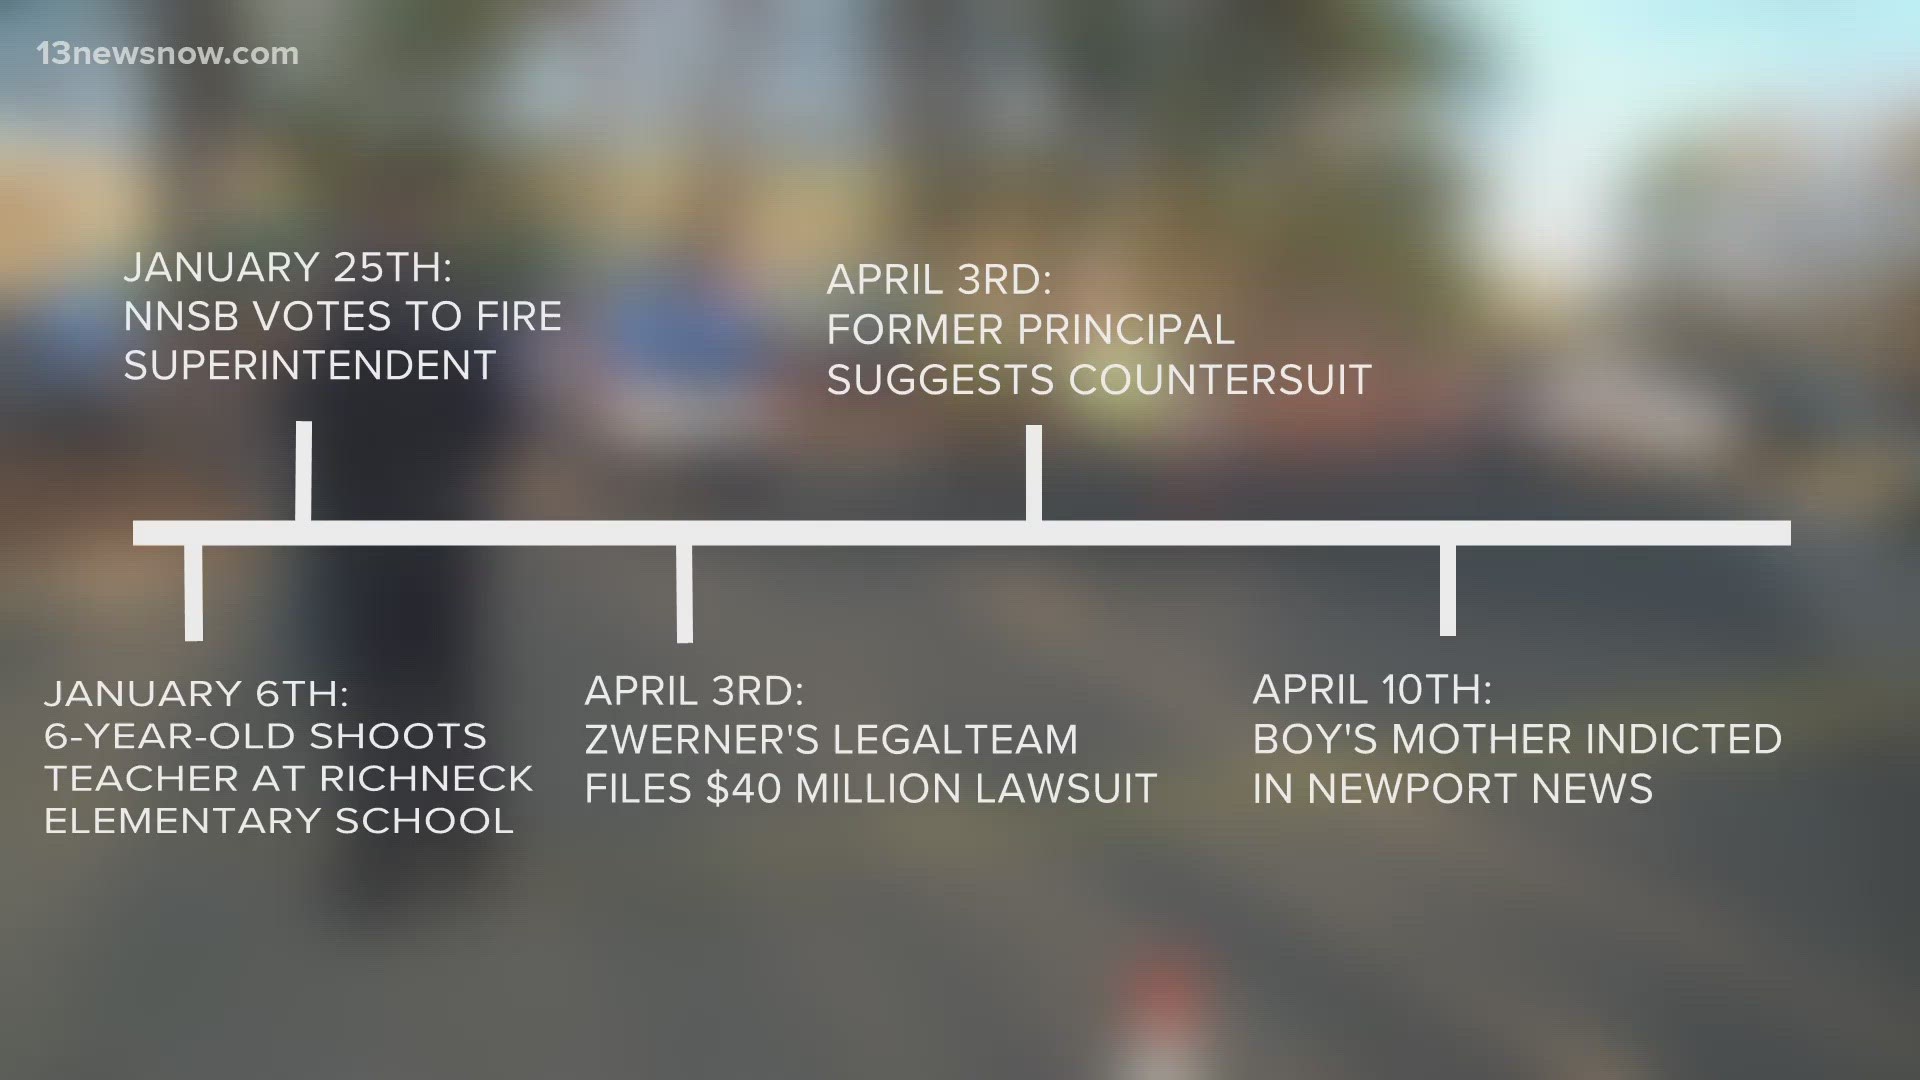 After the Newport News Commonwealth's Attorney charged the mother of the child on April 10, we're taking a look back at how things have unfolded since.